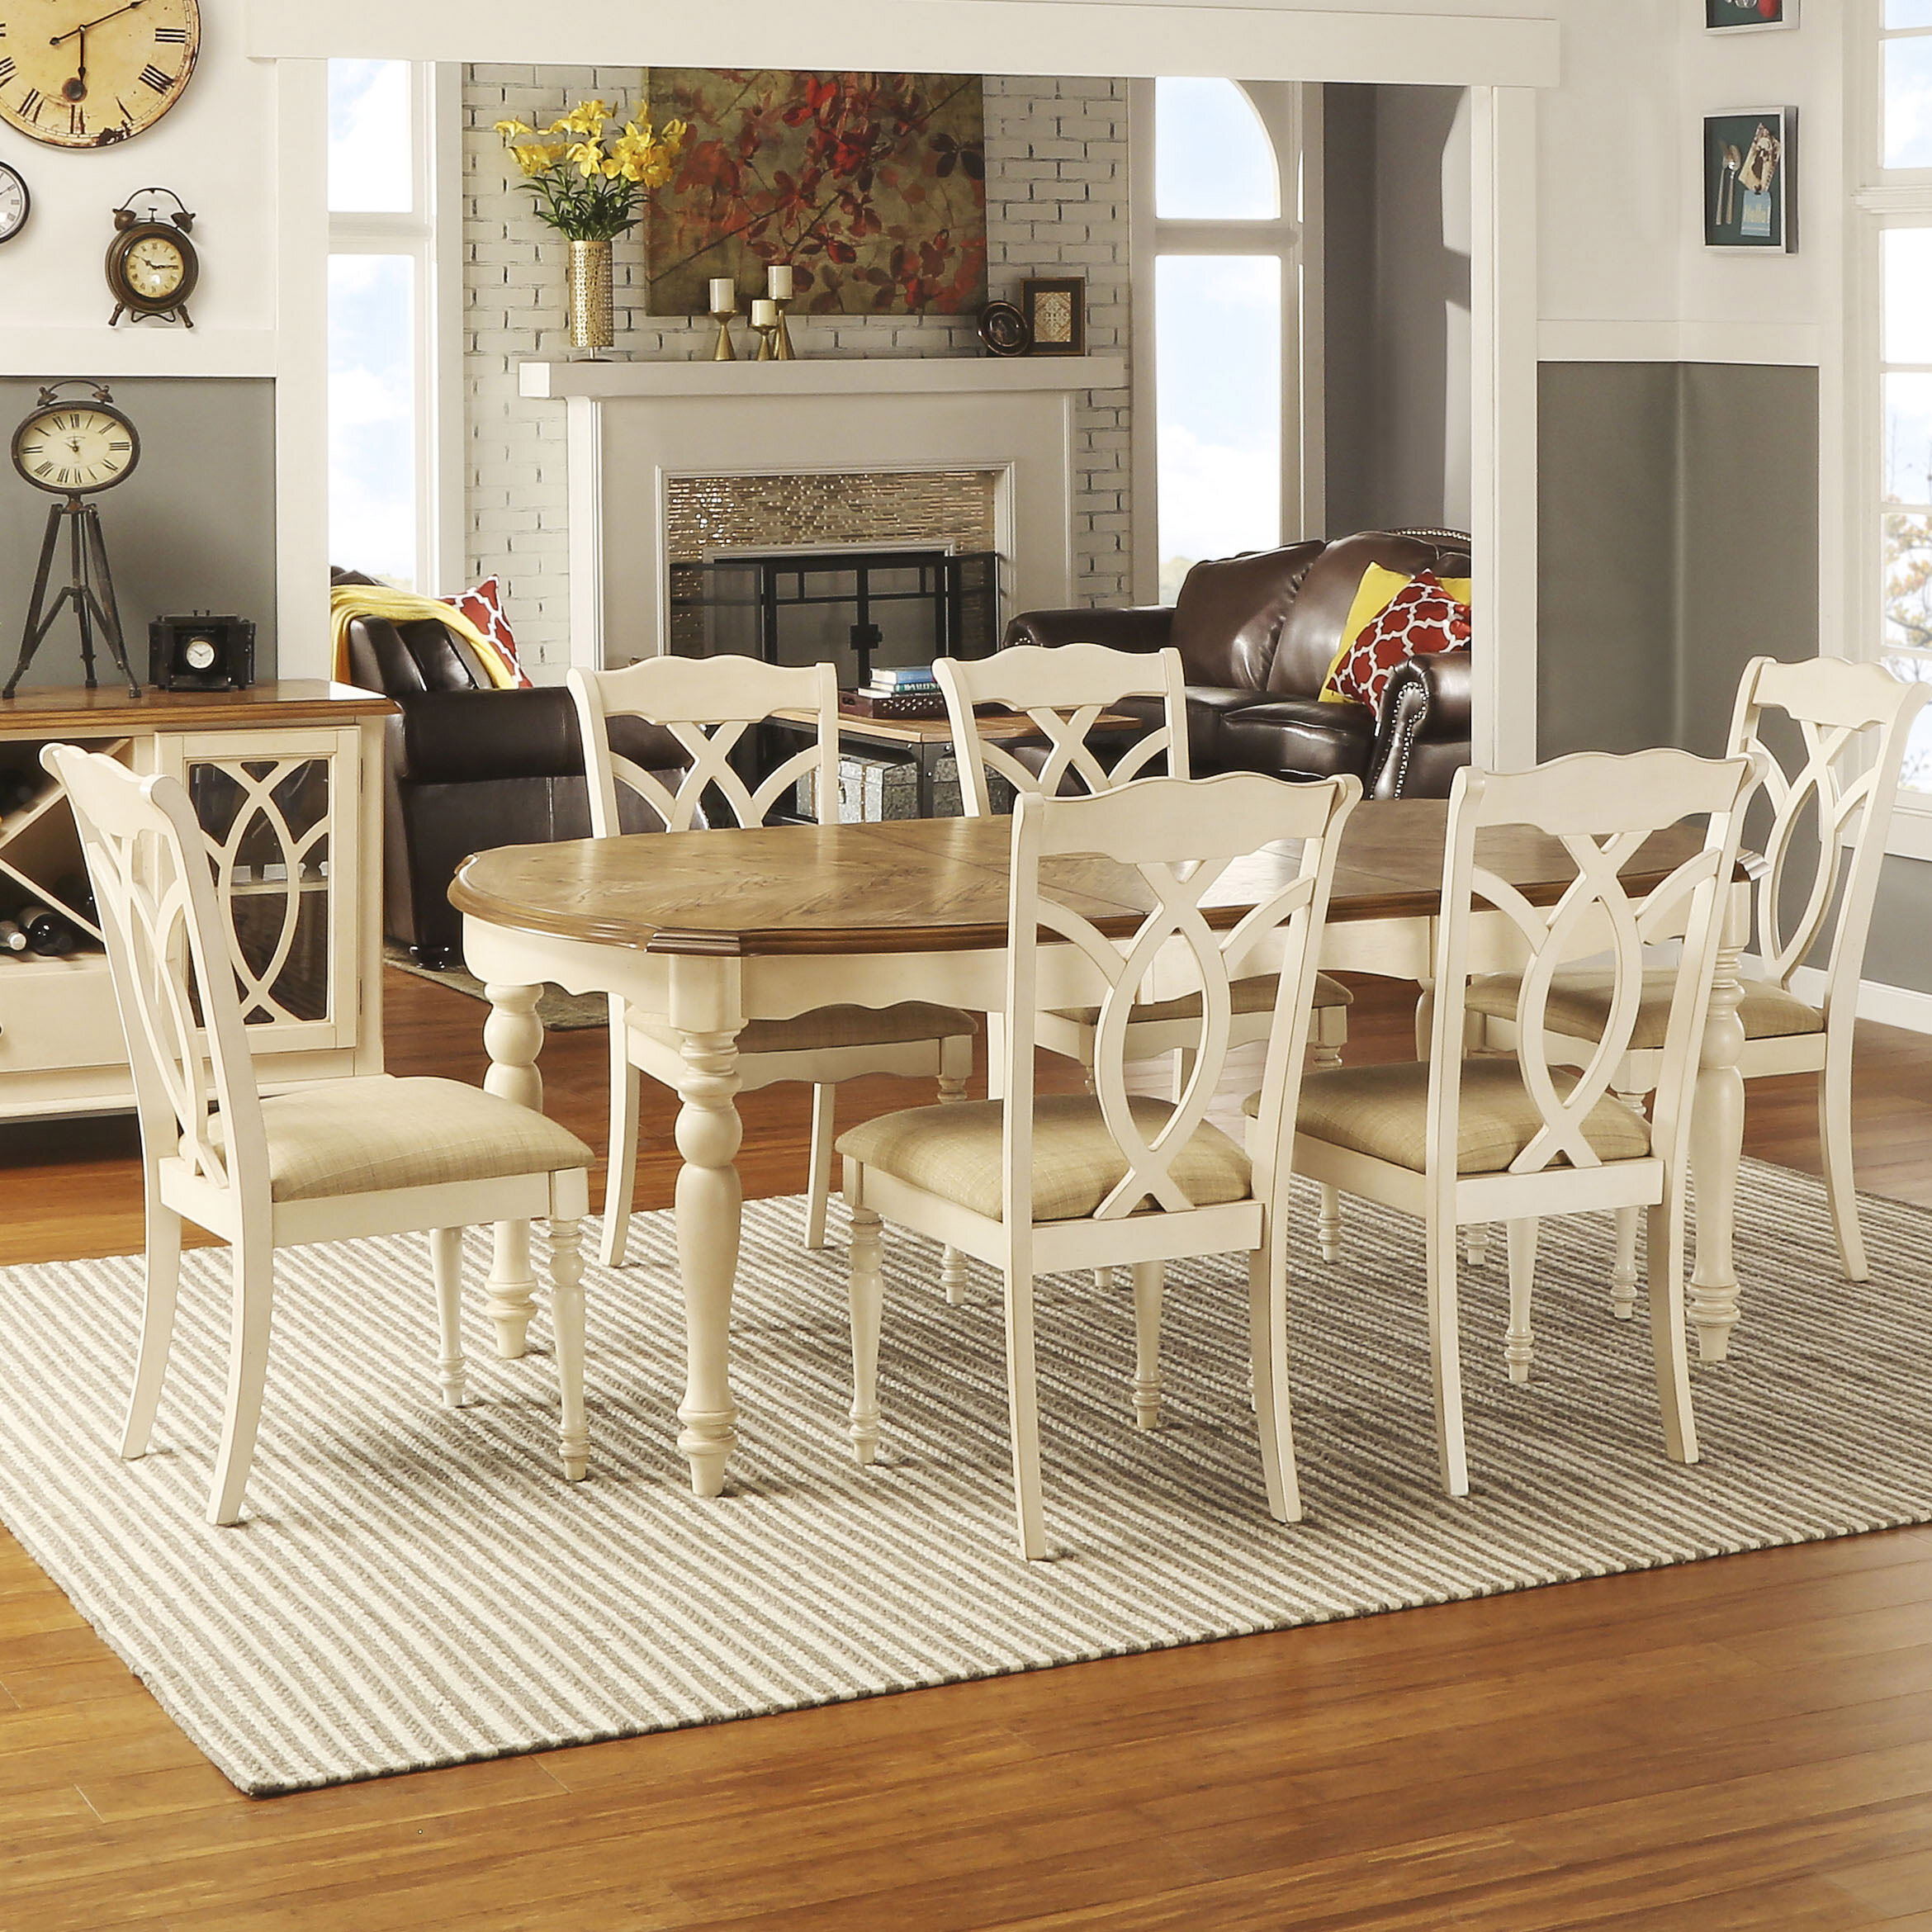 Ophelia & Co. Grandin Butterfly Leaf Trestle Dining Table & Reviews